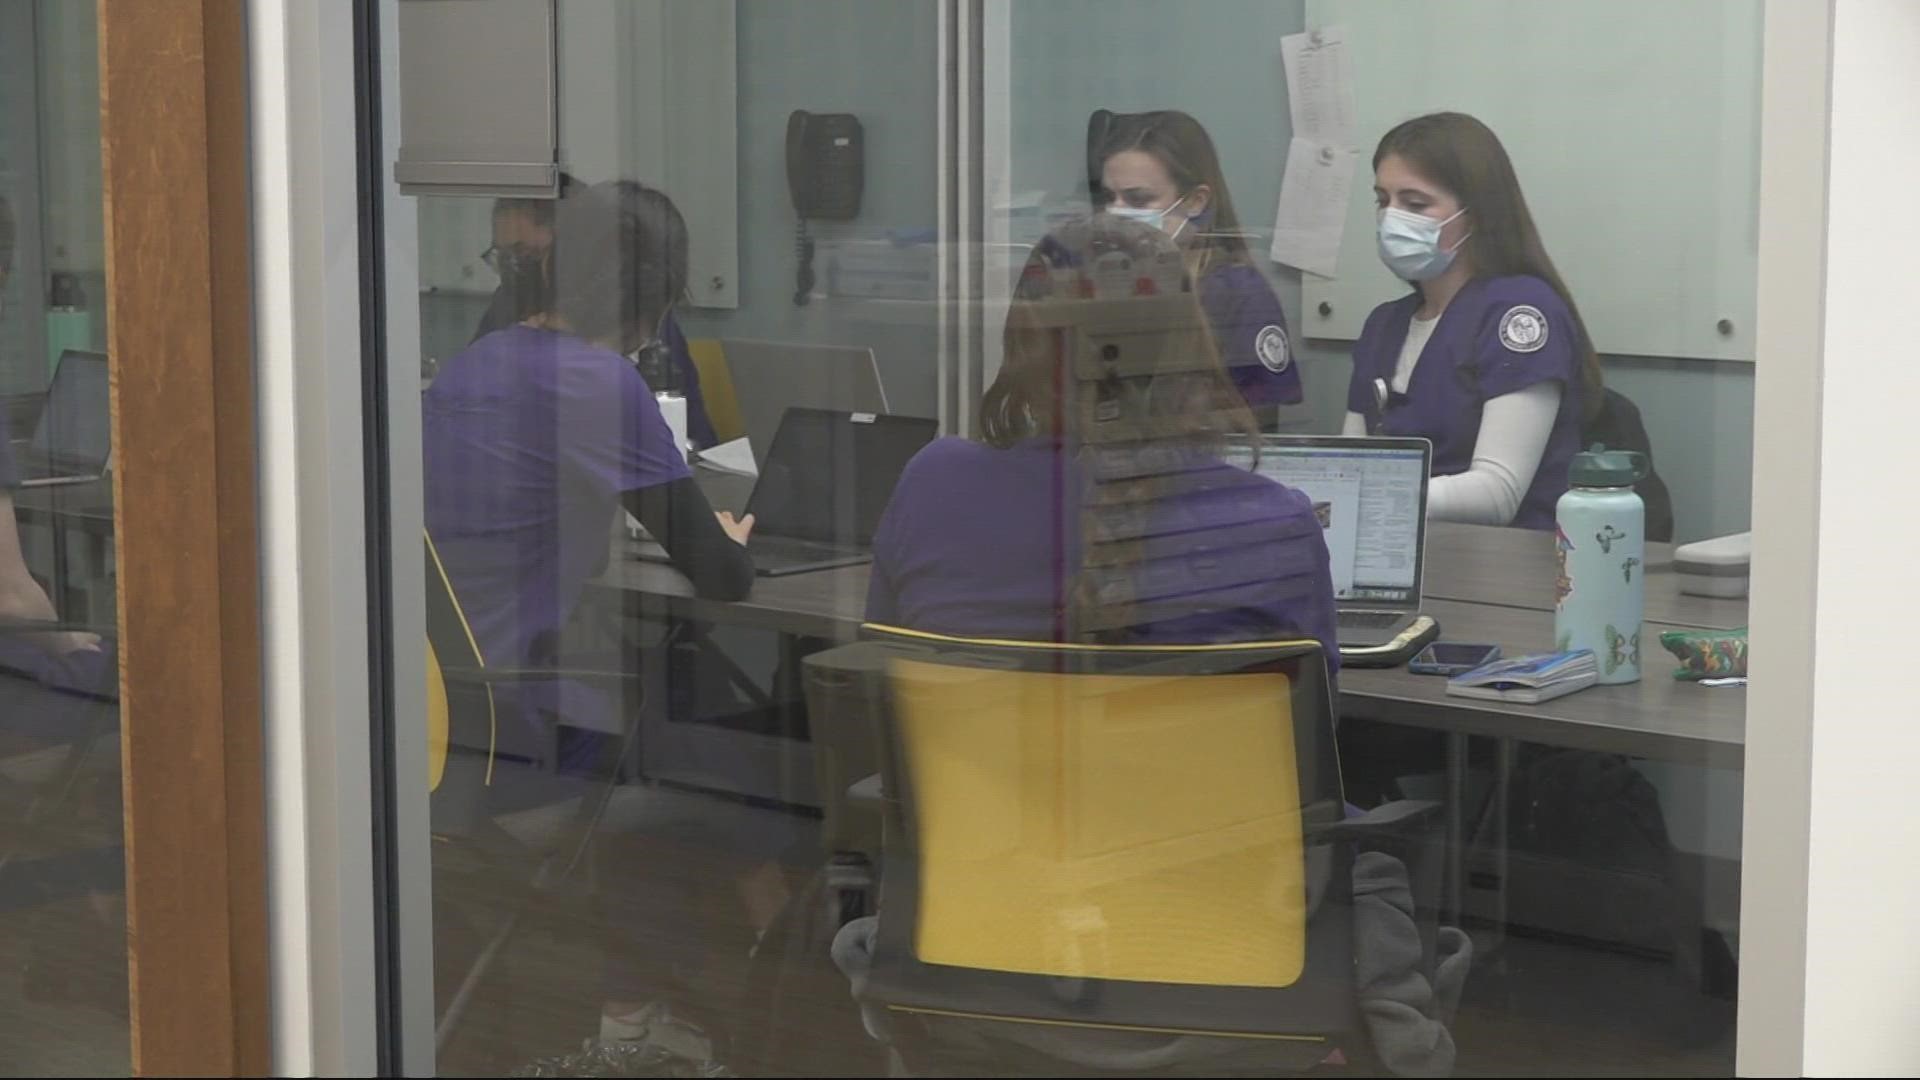 The nursing workforce is facing a crisis in both a personnel shortage and burn-out. The University of Portland is working to prepare students for the realities.